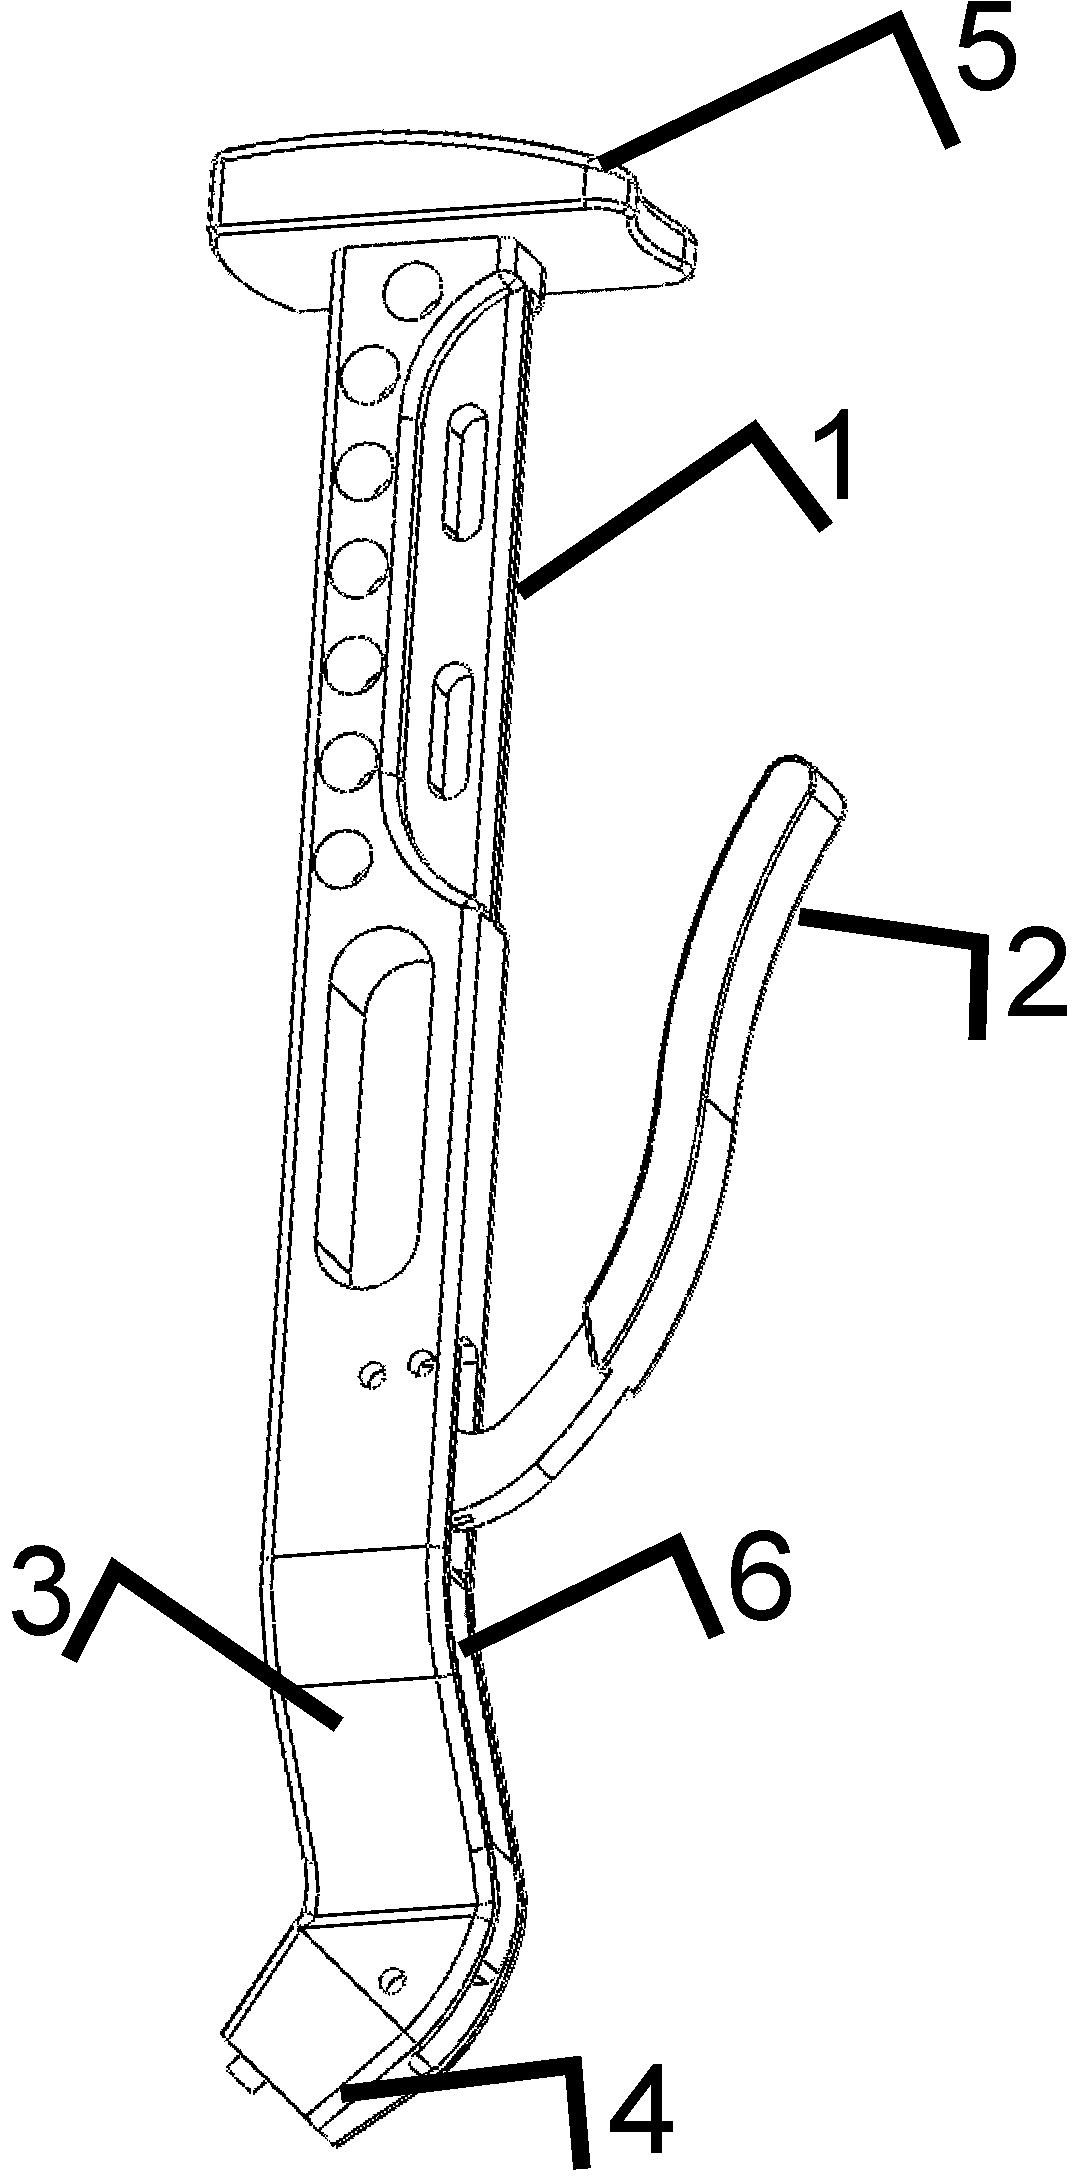 Medullary cavity filing and extracting device